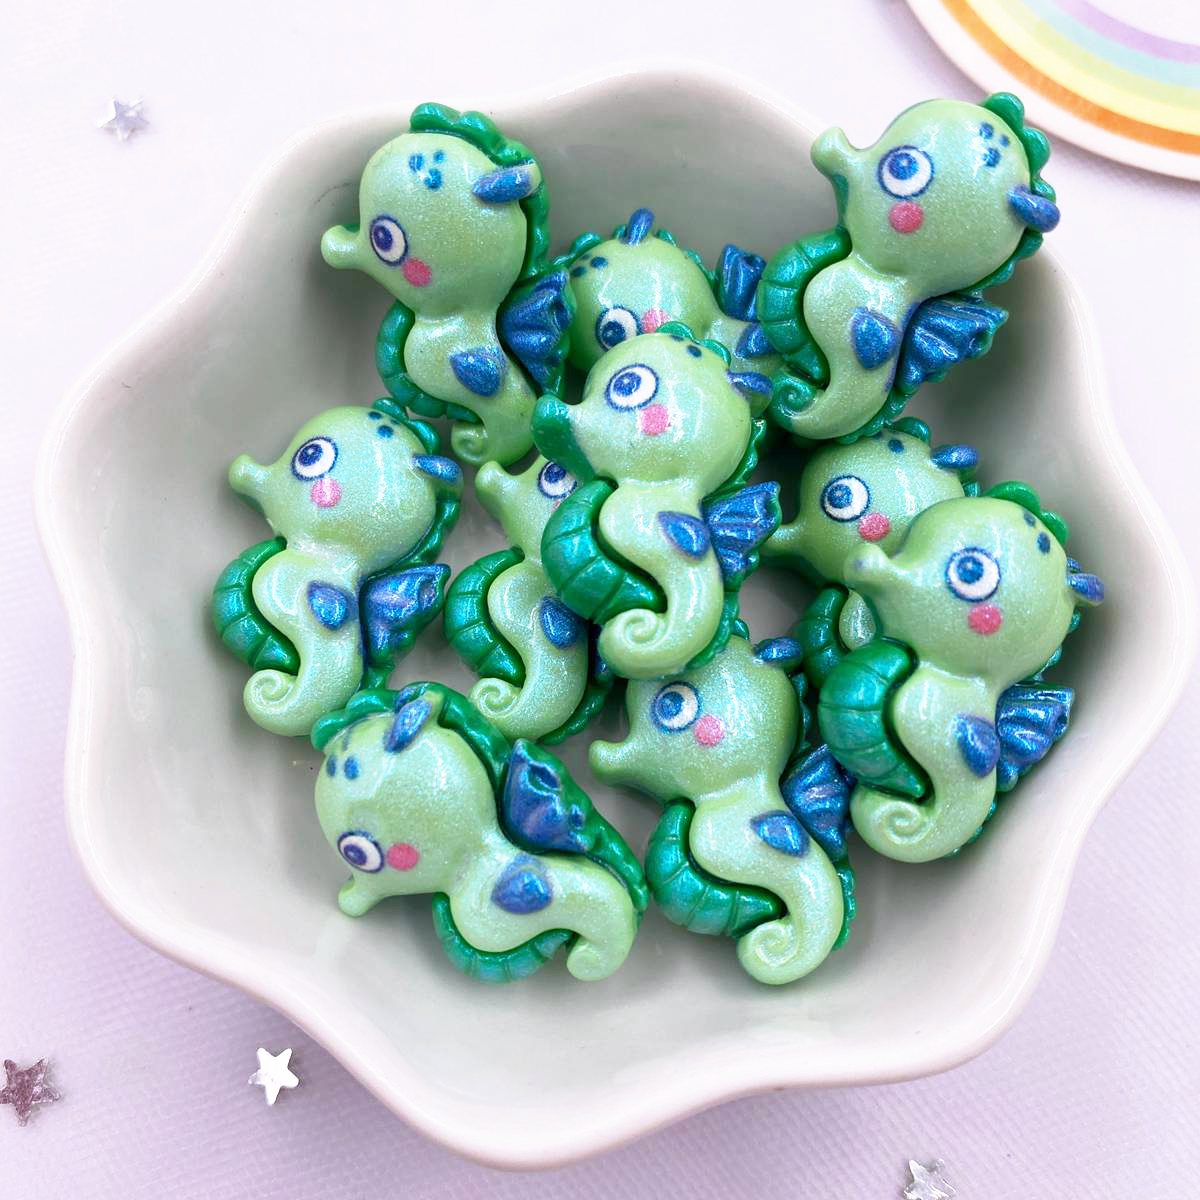 10-50Pcs Cute Marine Animal Flat Back Resin Color Accessories DIY Craft  Supplies Phone Shell Patch Arts Material Kids Gift Toys